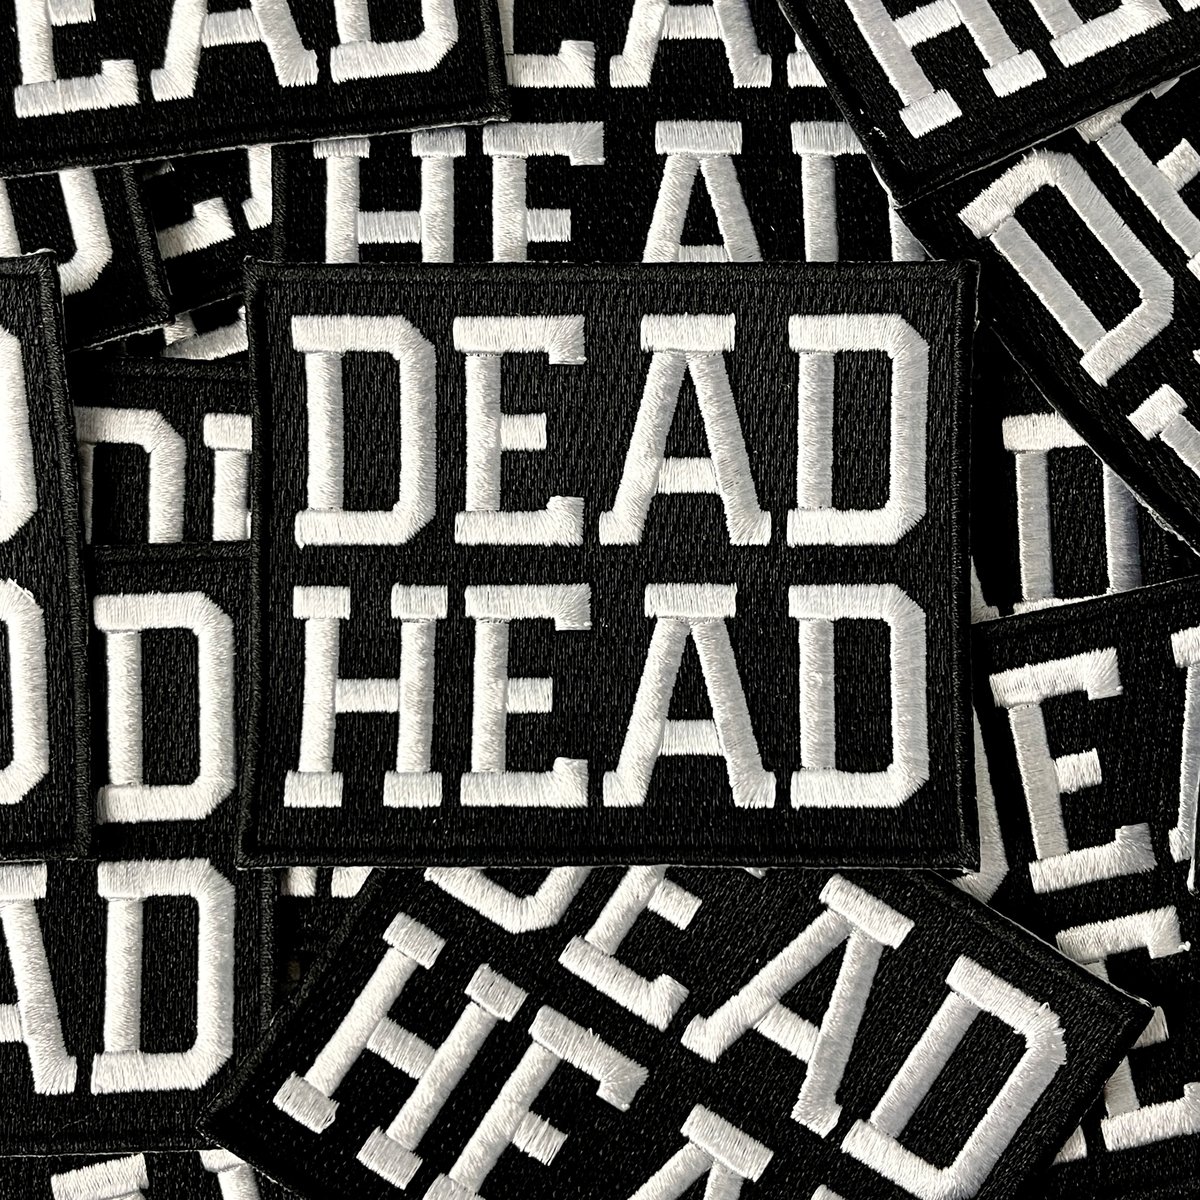 Dead Head Embroidered Patch! - 3.5 x 3 inches 